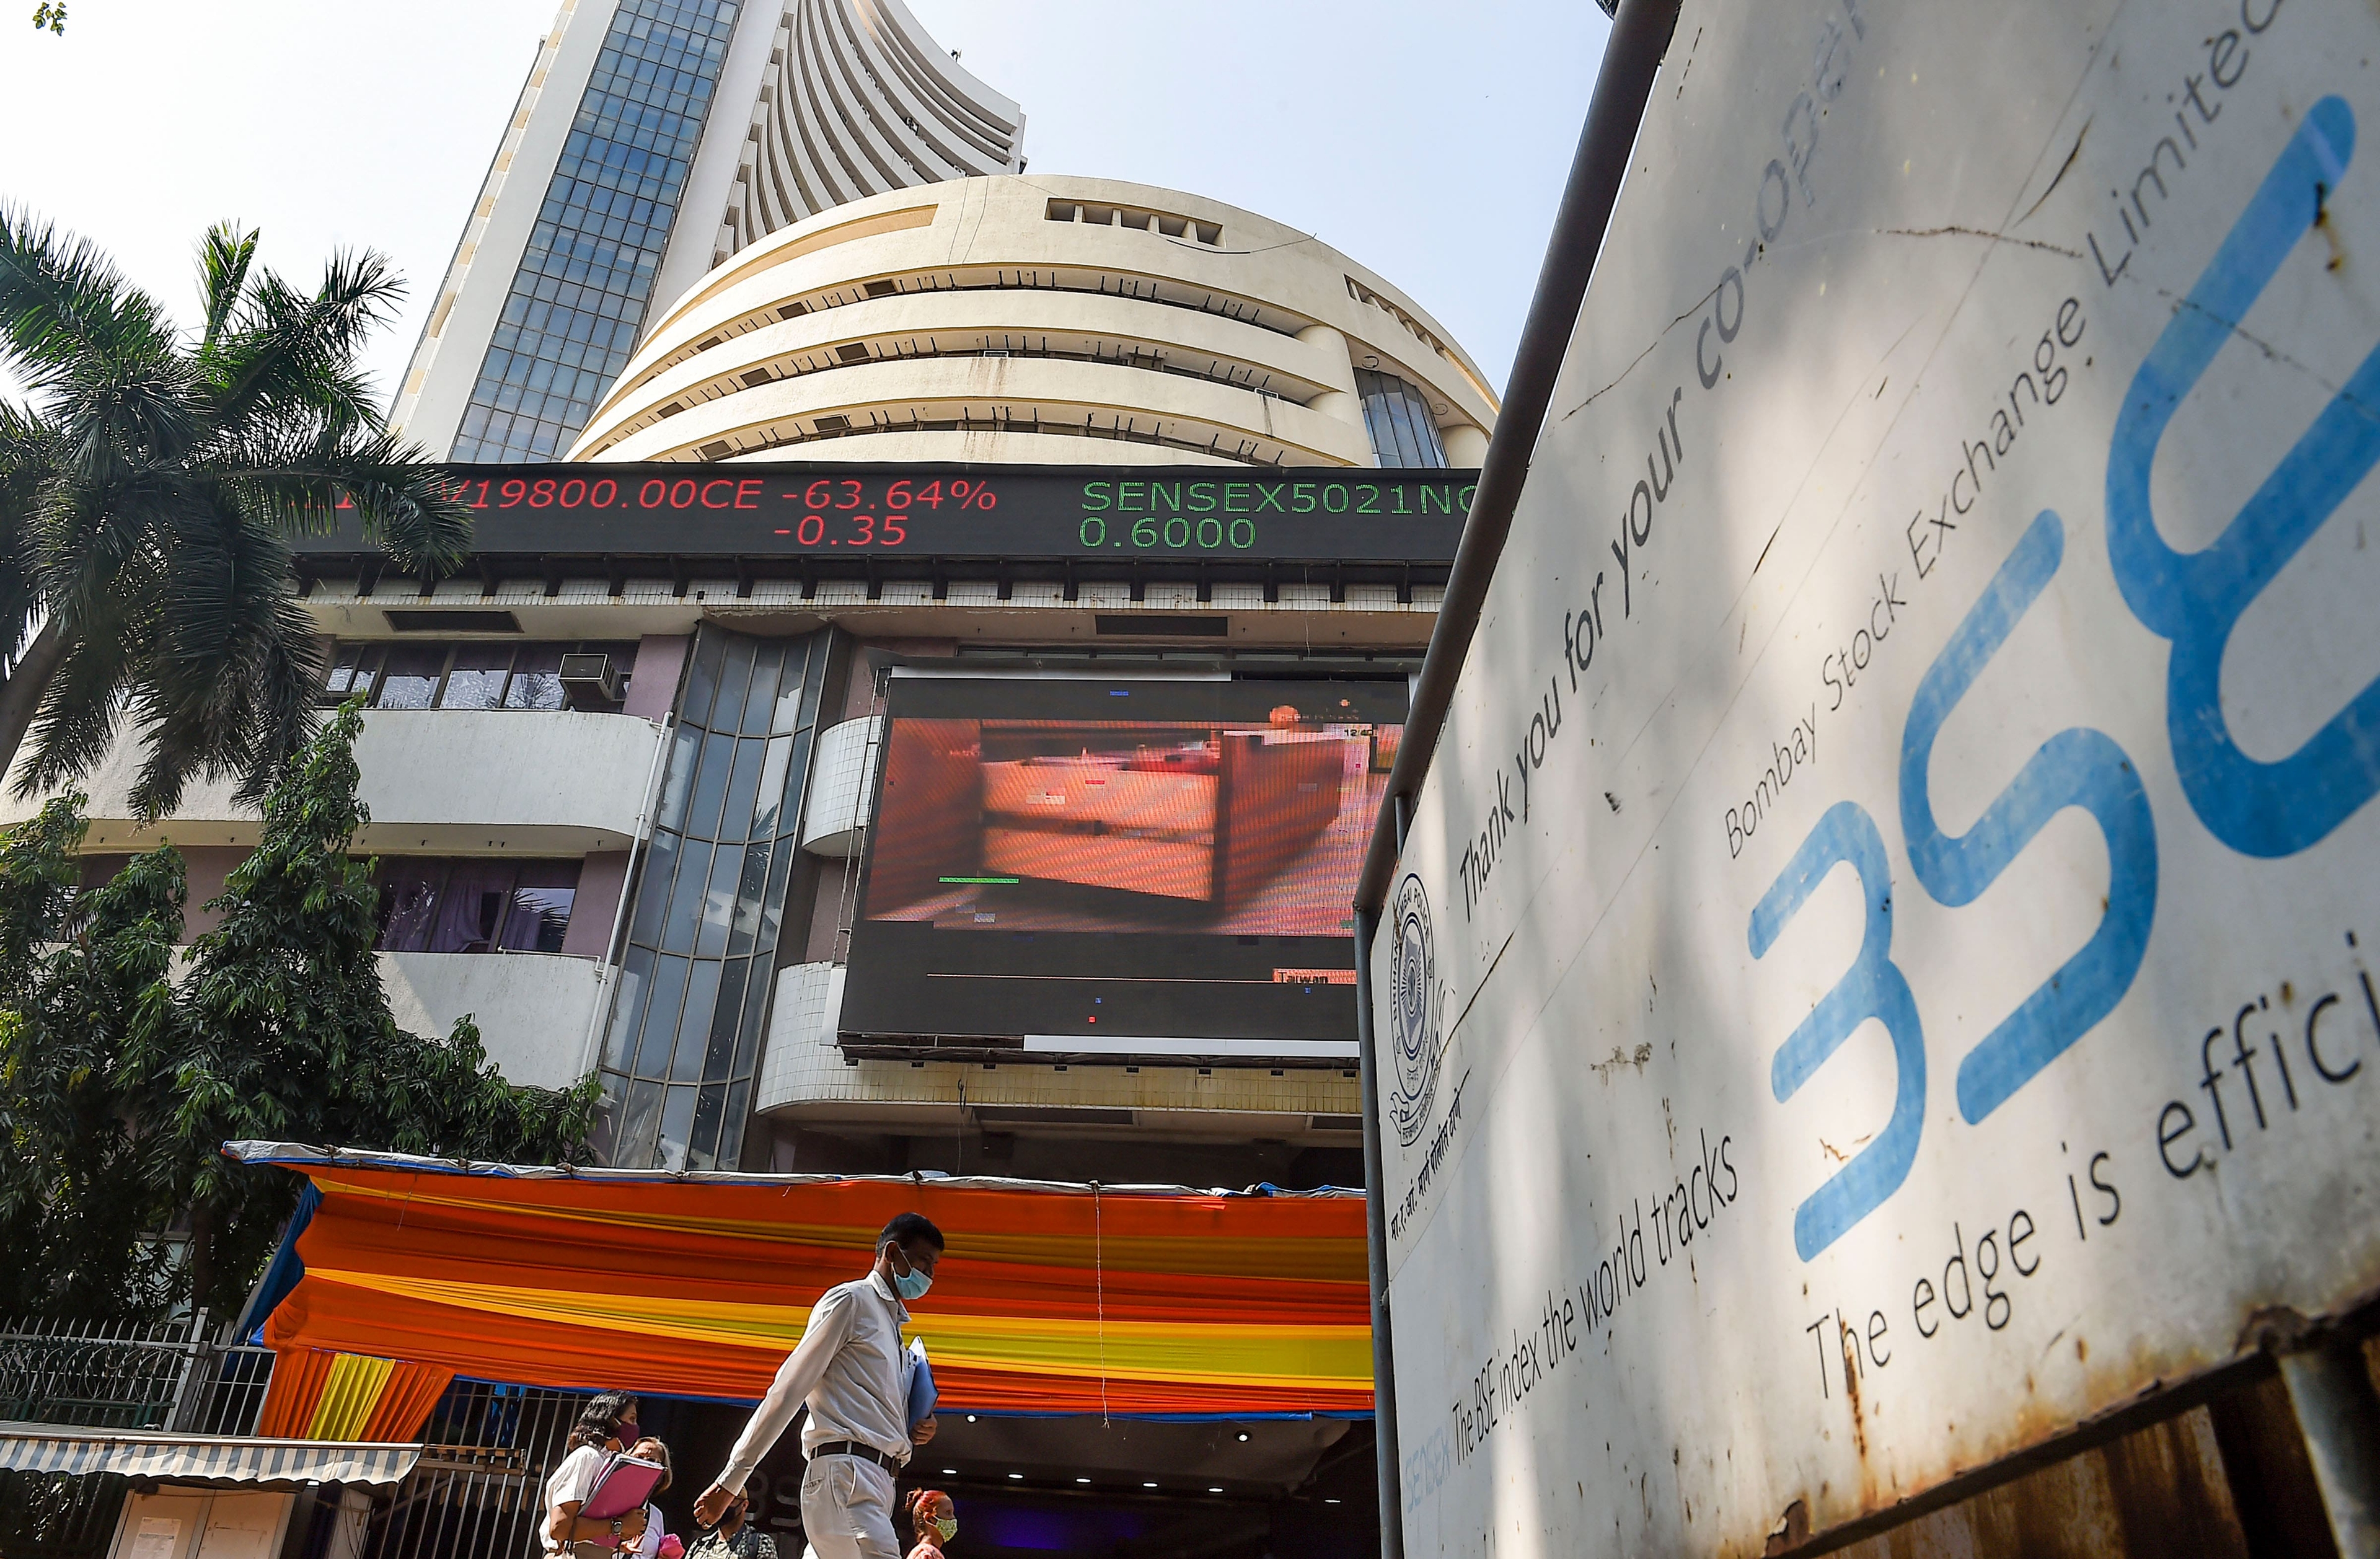 Headlines indices the Sensex and the Nifty extended gains into the second consecutive session on April 21 as investors continued picking stocks on cheaper valuation after the recent correction. The 30-share pack closed 874 points, or 1.53 percent, higher at 57,911.68. Nifty50 closed 256 points, or 1.49 percent, higher at 17,392.60.